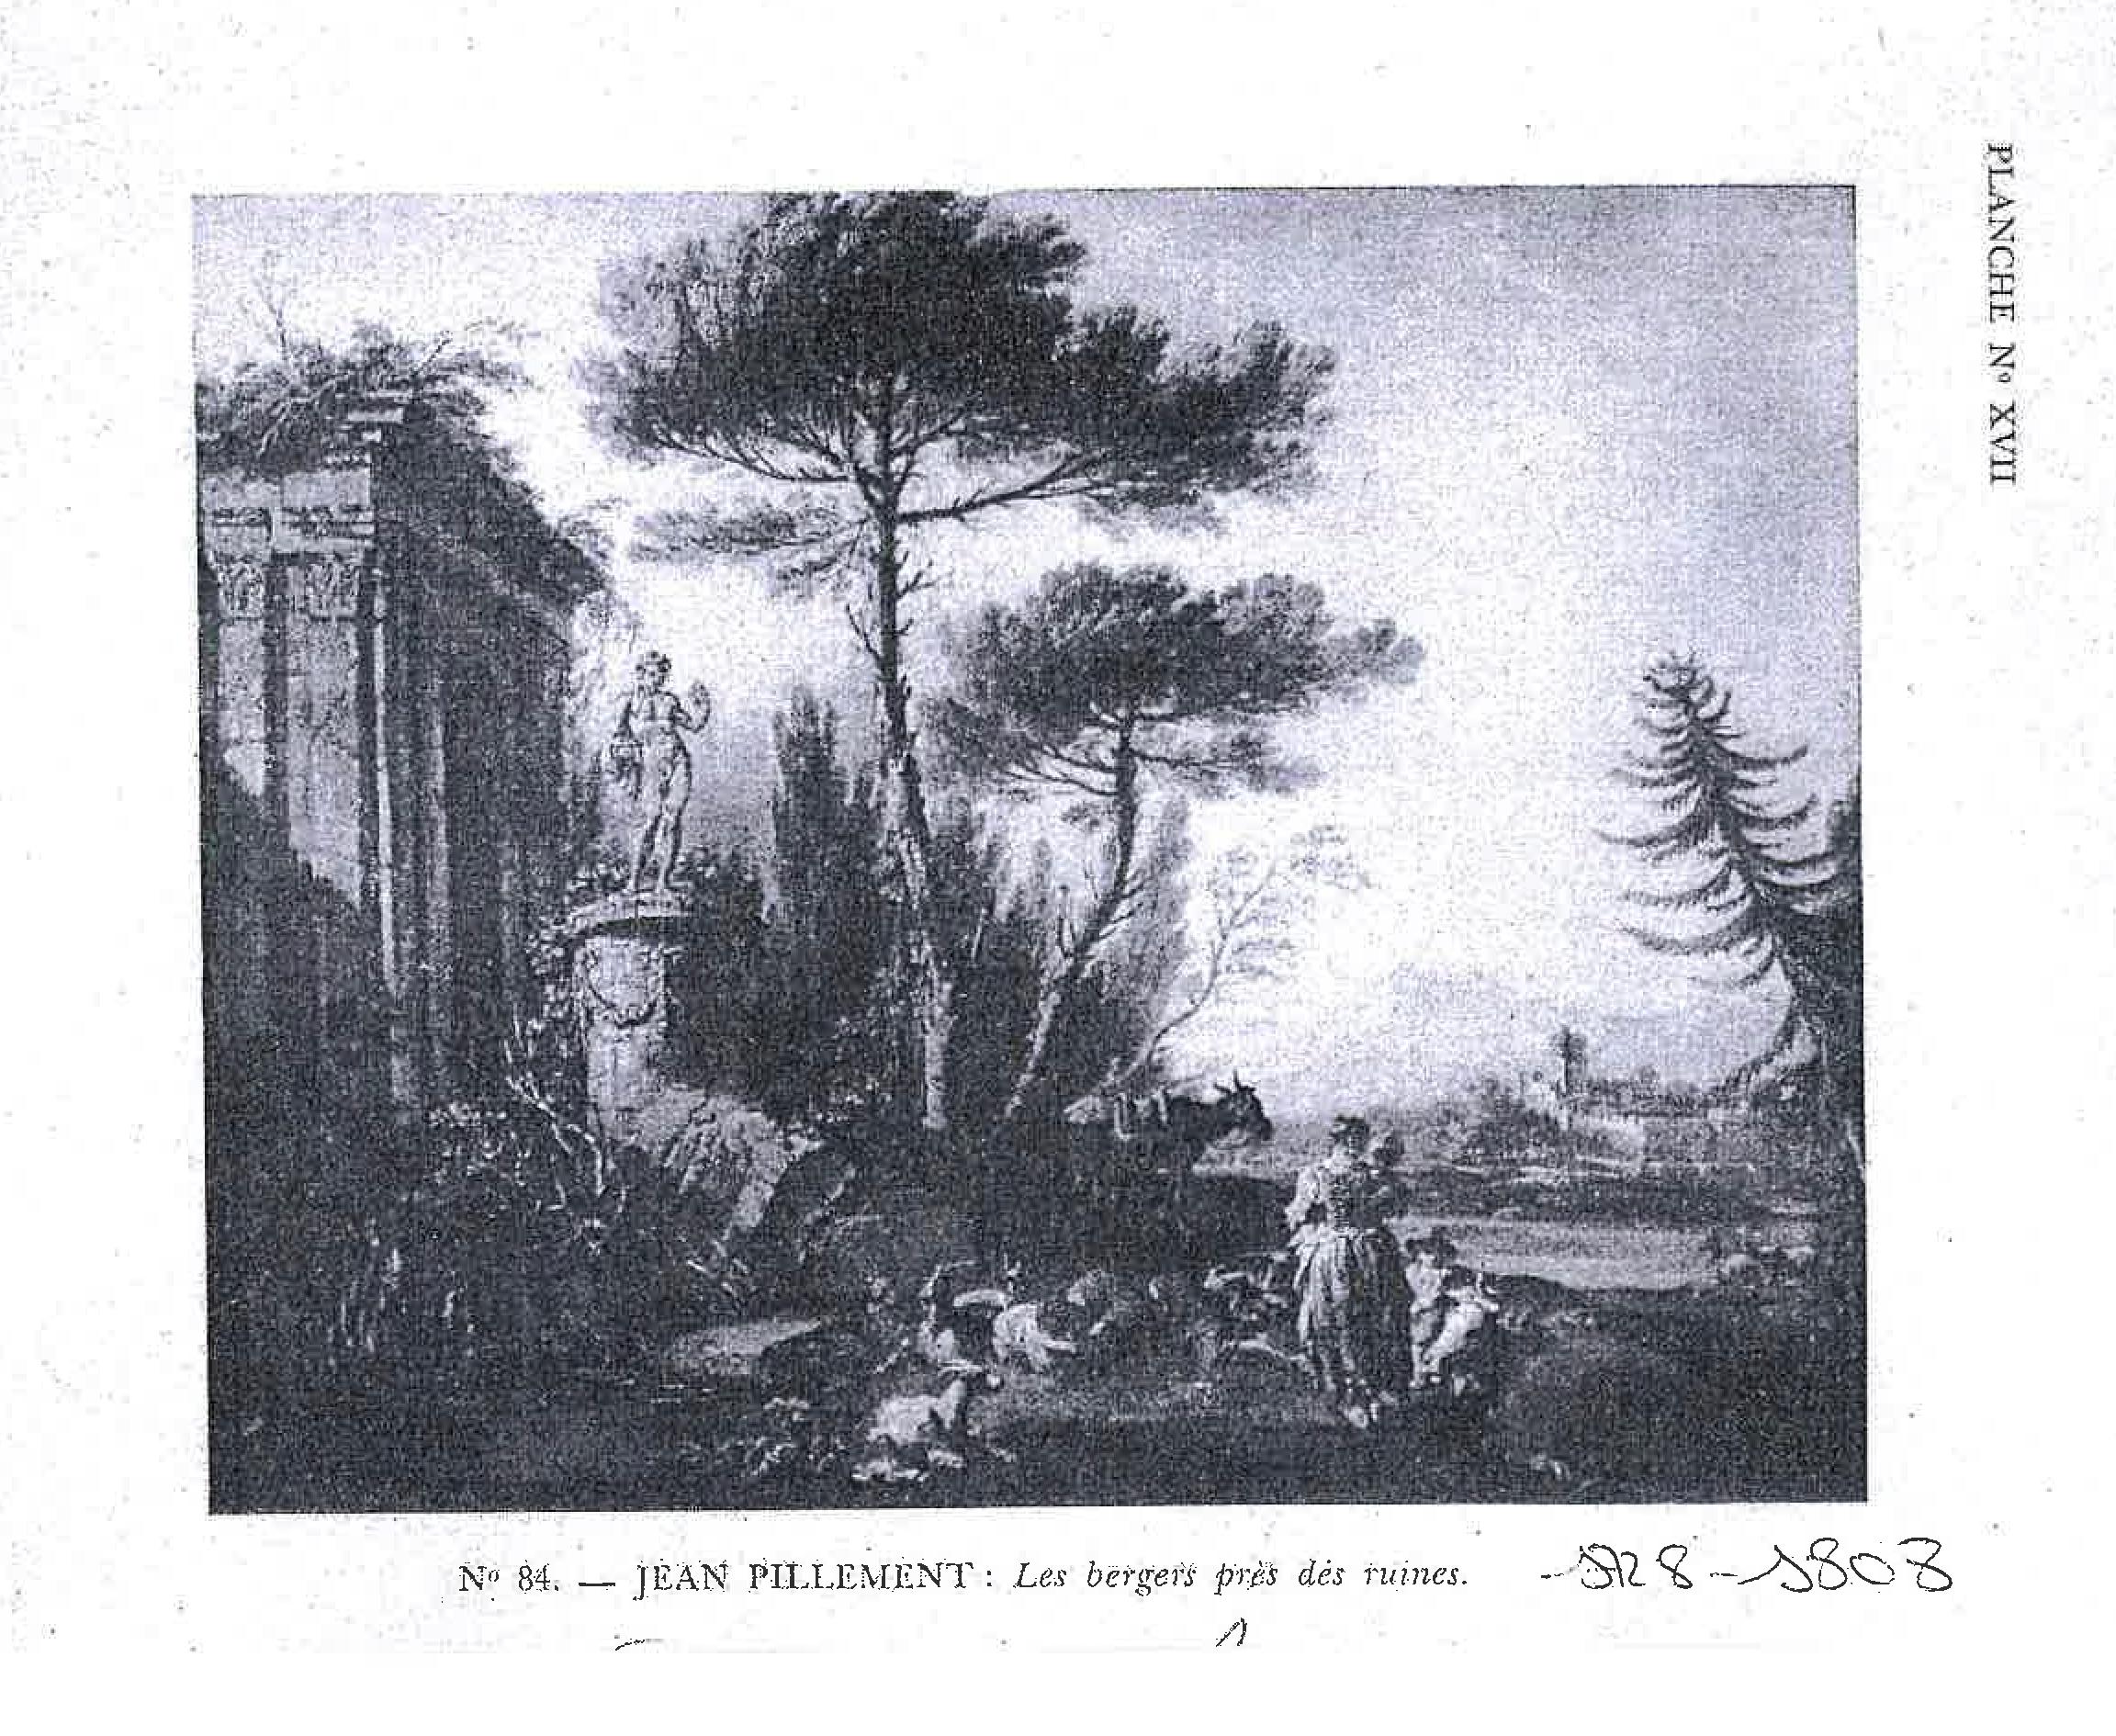 Rural landscape painting attributed to J.B. Pillement - XVIII century.
Rural landscape painting with ancient classical ruins attributed to Jean-Baptiste Pillement – XVIII century
This oil-on-canvas painting attributed to French artist